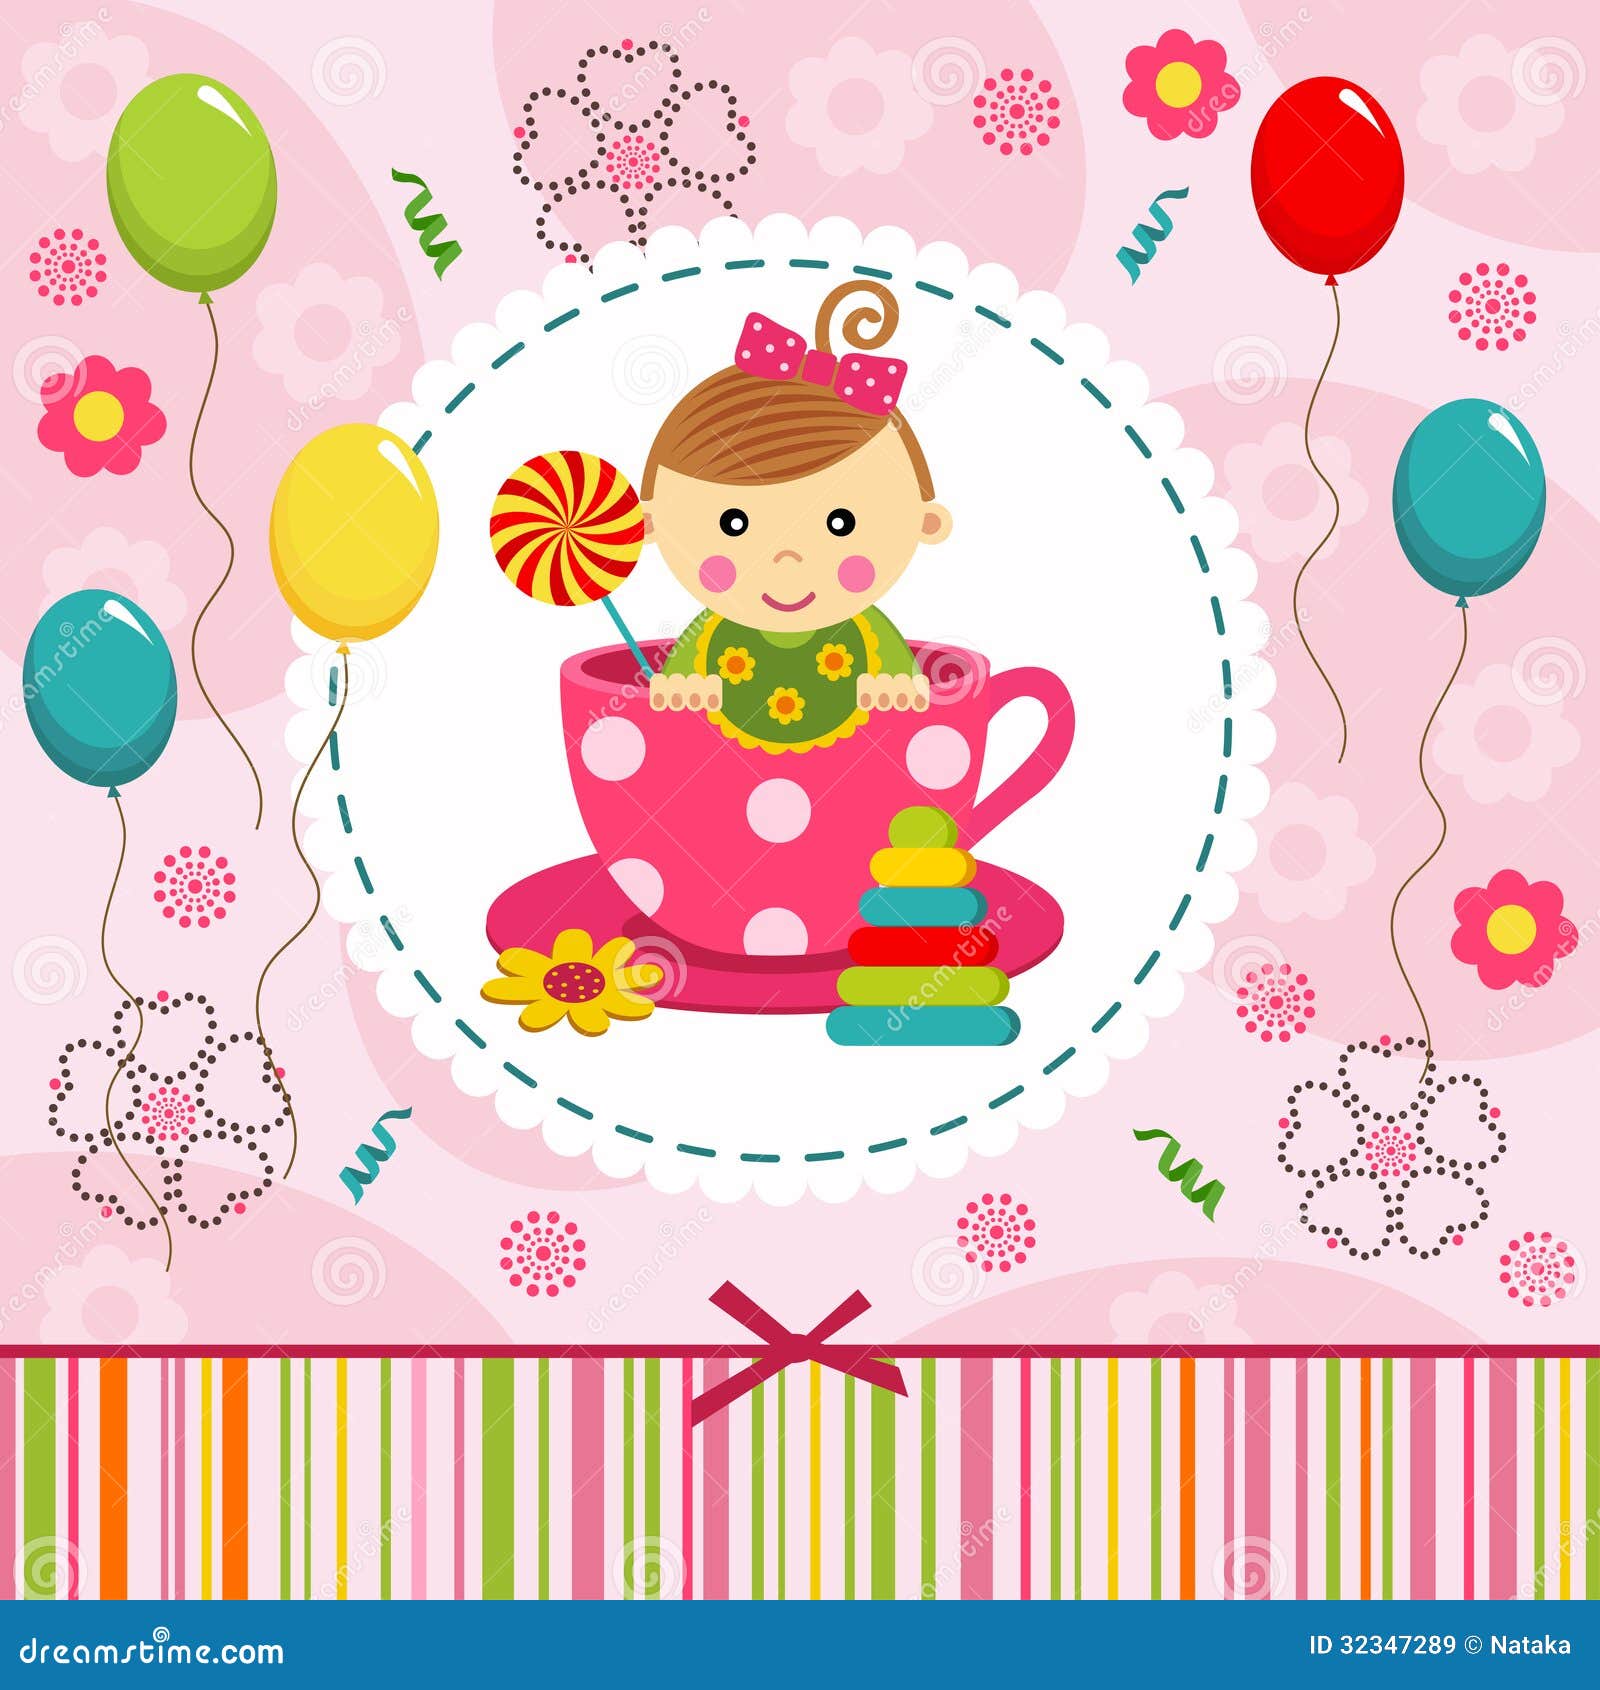 vector free download baby - photo #32